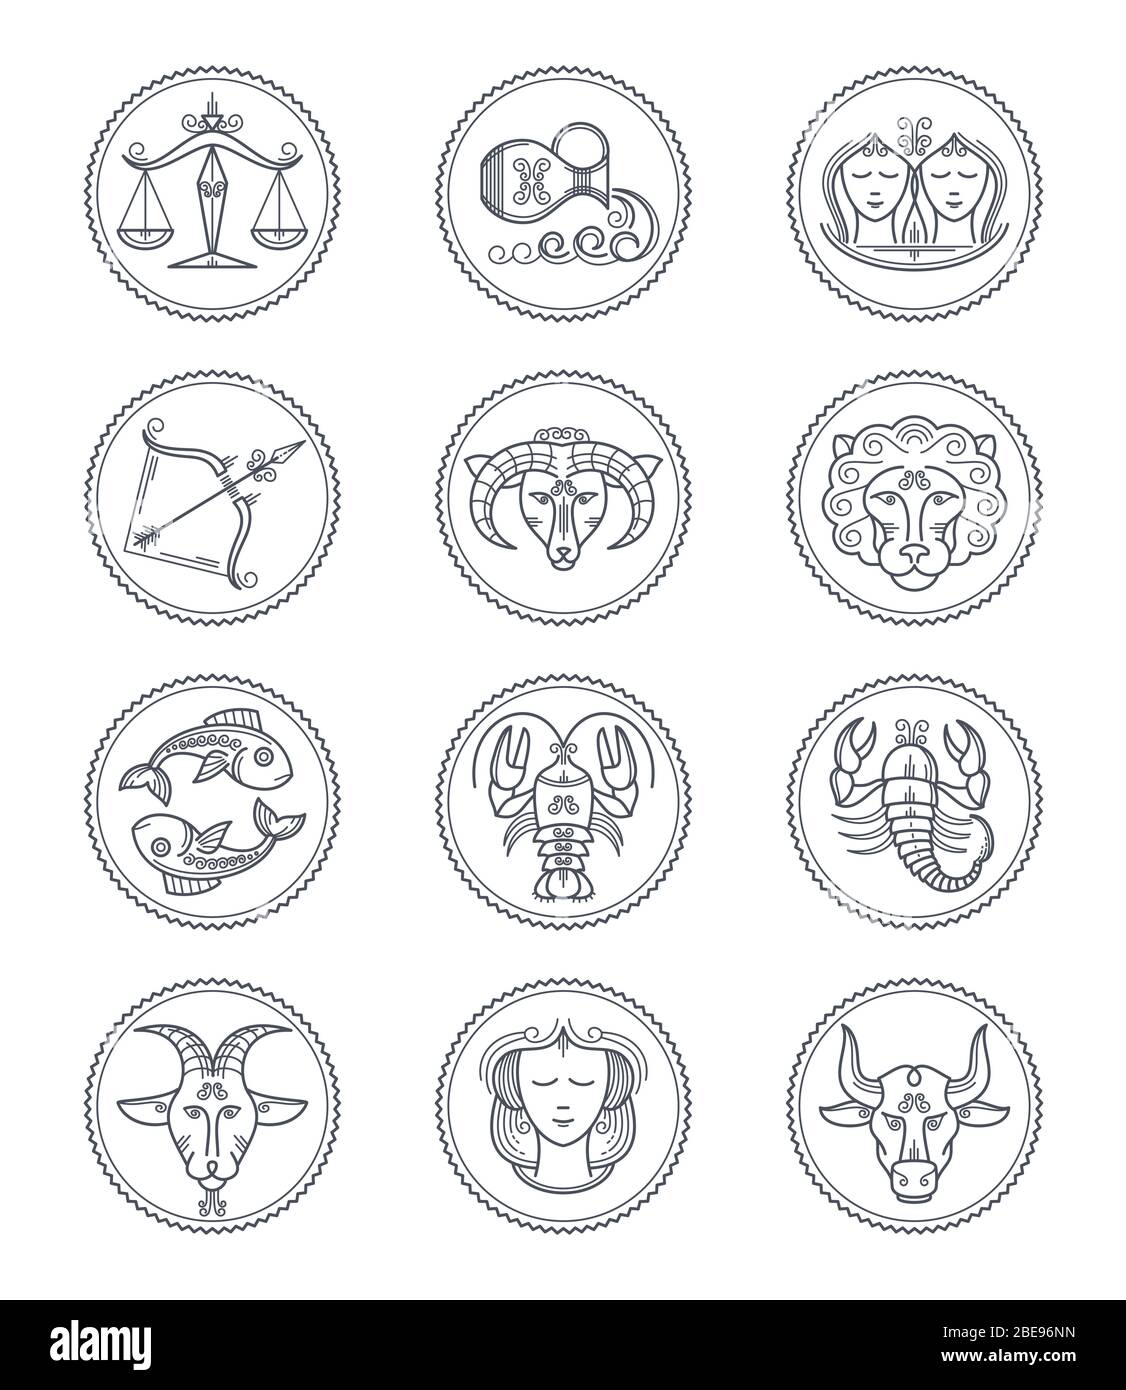 Zodiac vector astrology vector line icons. Aries and taurus, gemini and cancer, leo and virgo, libra and scorpio, sagittarius and capricorn, aquarius and pisces signs. Horoscope line style symbols Illustration Stock Vector